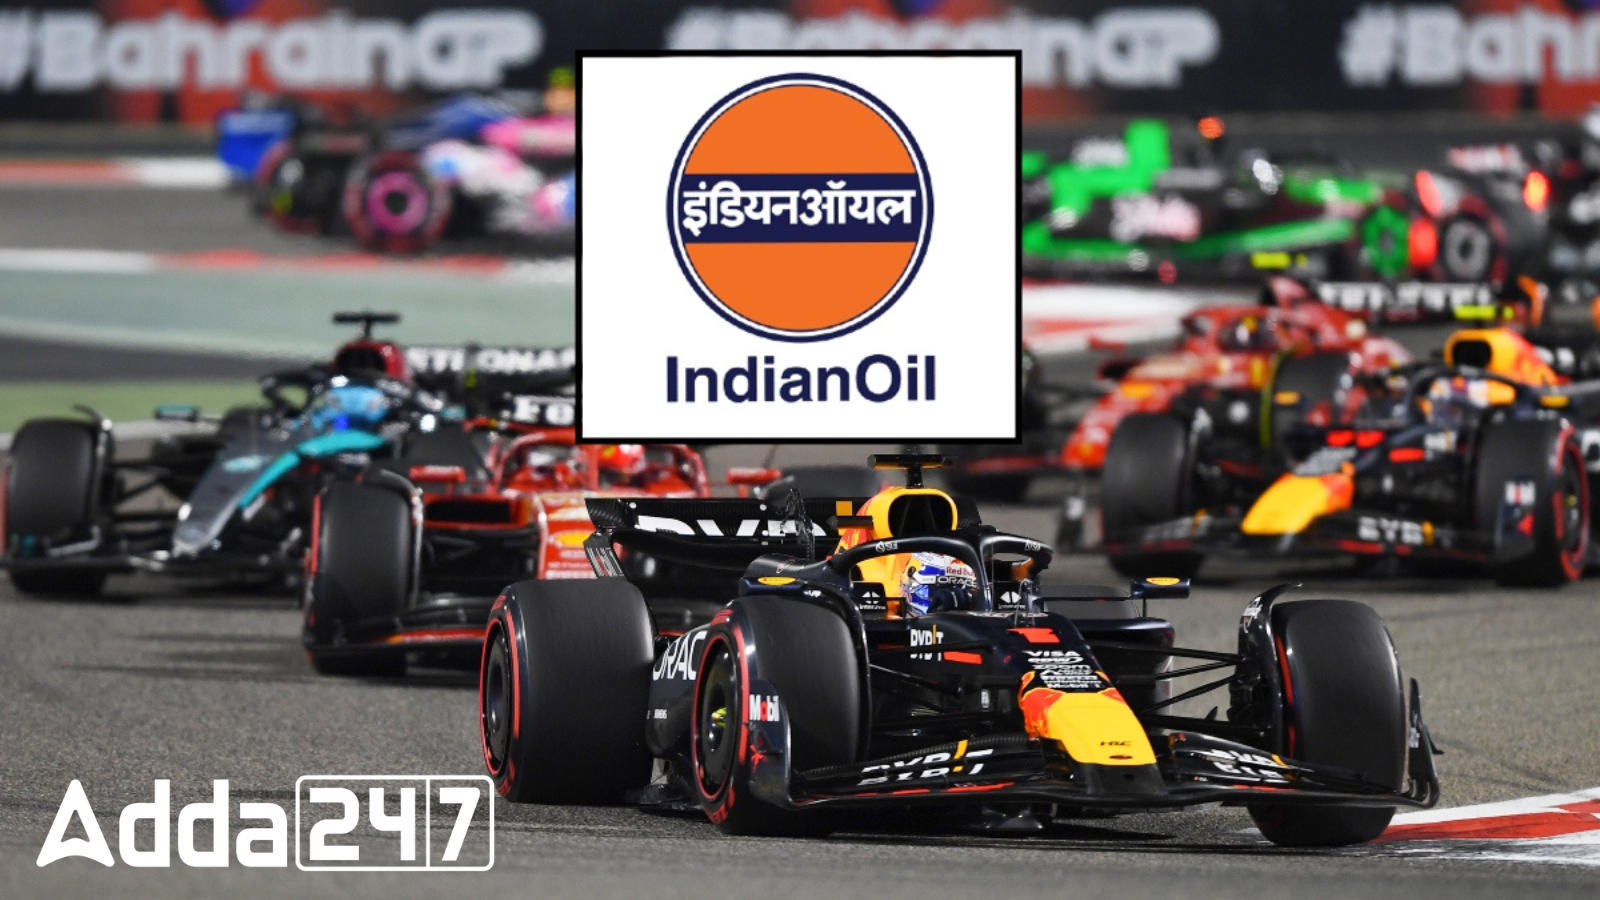 Indian Oil Produces Formula 1 Fuel In India_60.1